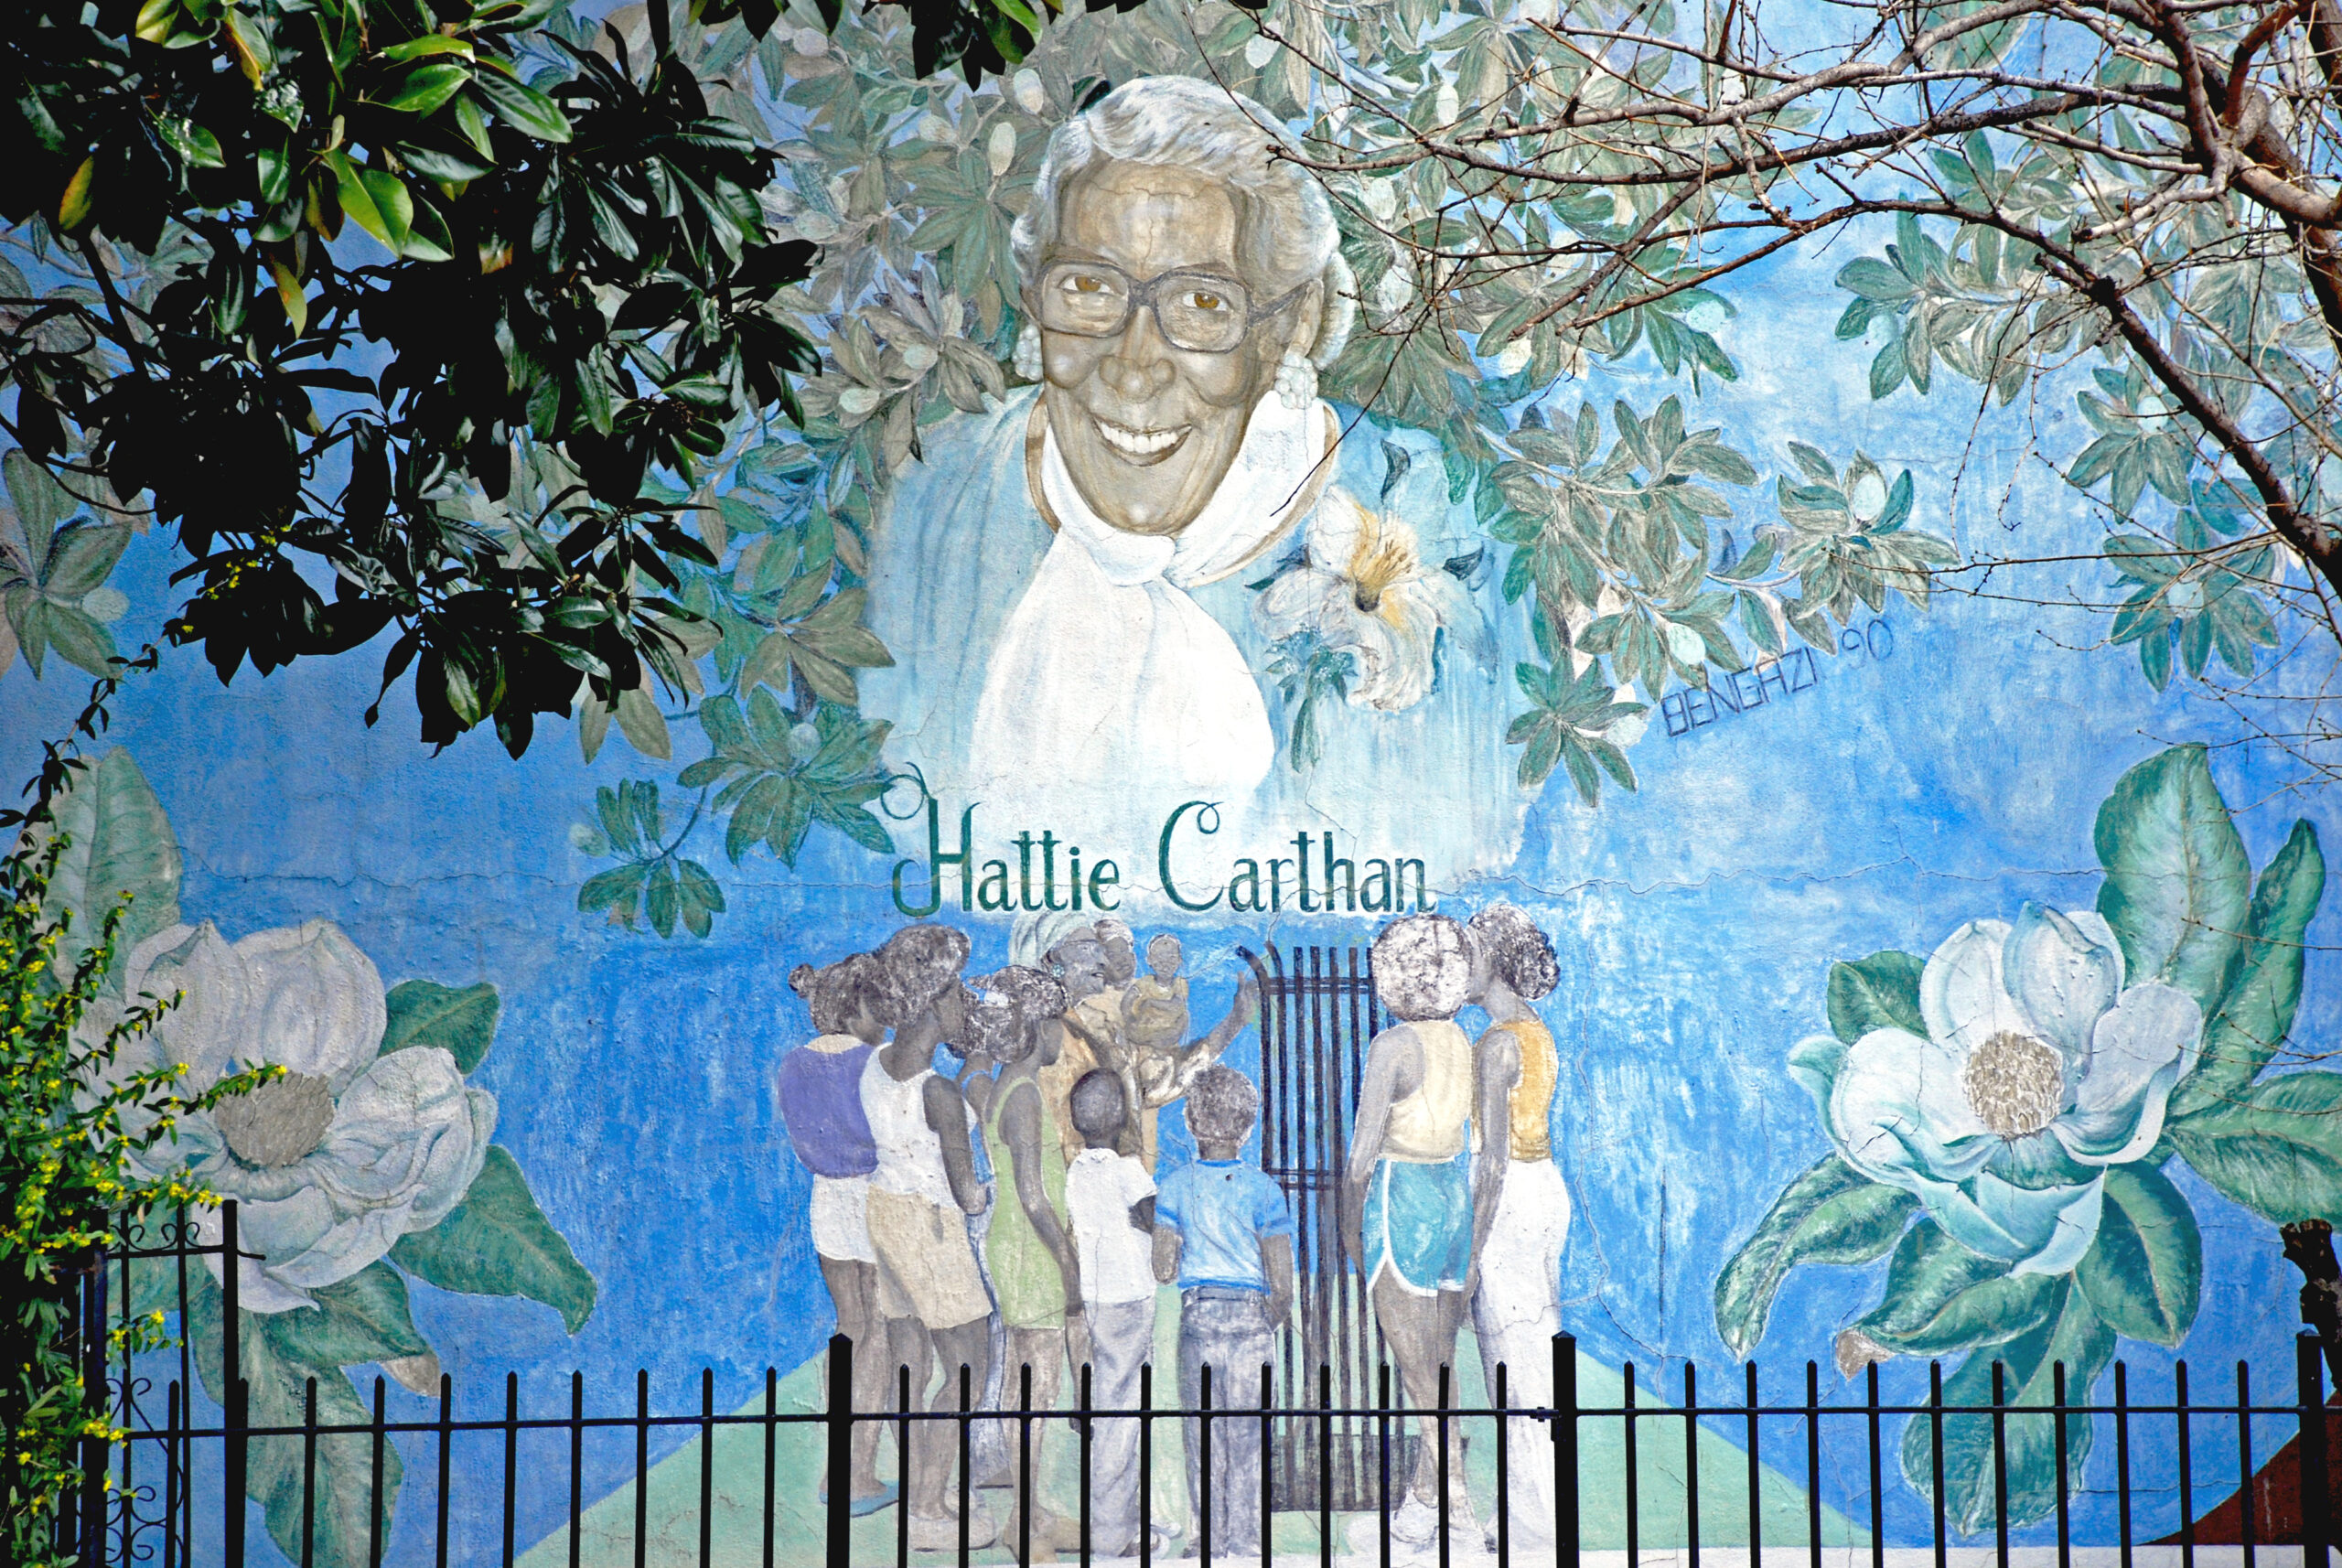 A mural depicting Hattie Carthan, a group of people, and flowers on a blue backdrop